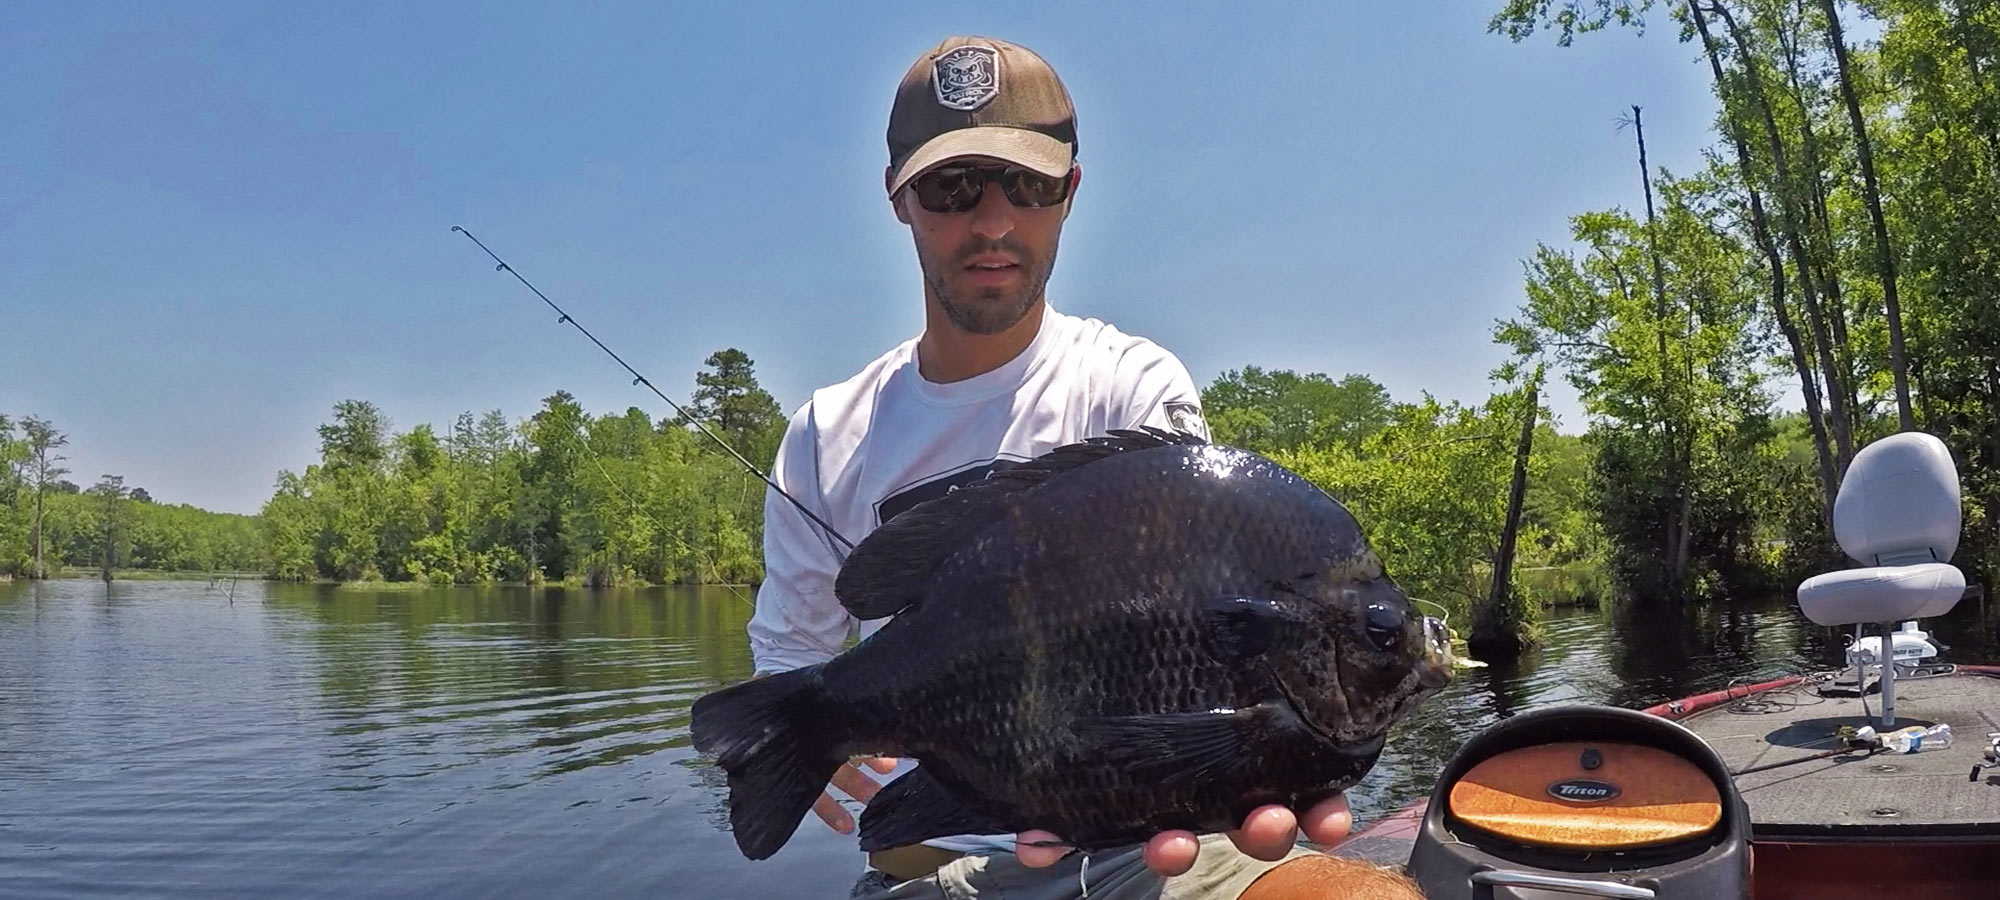 Try out these tips for catching bluegill and crappie! #fishing